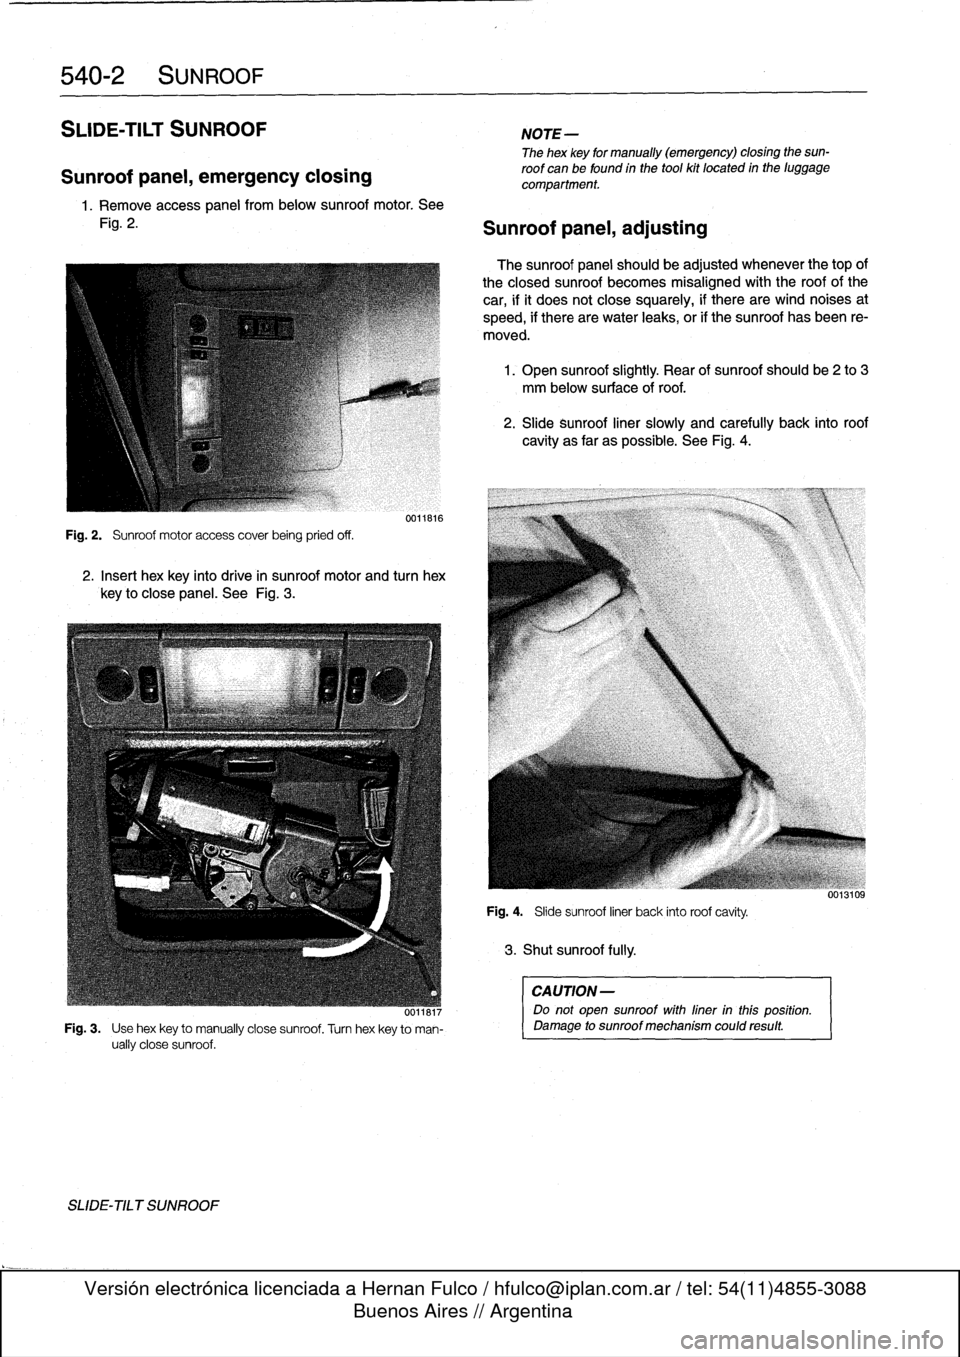 BMW 318i 1997 E36 Workshop Manual 
540-2
SUNROOF

SLIDE-TILT
SUNROOF

Sunroof
panel,
emergency
closing

1.
Remove
access
panel
frombelow
sunroof
motor
.
See

Fig
.
2
.

Fig
.
2
.

	

Sunroof
motor
access
coverbeing
pried
off
.

001181